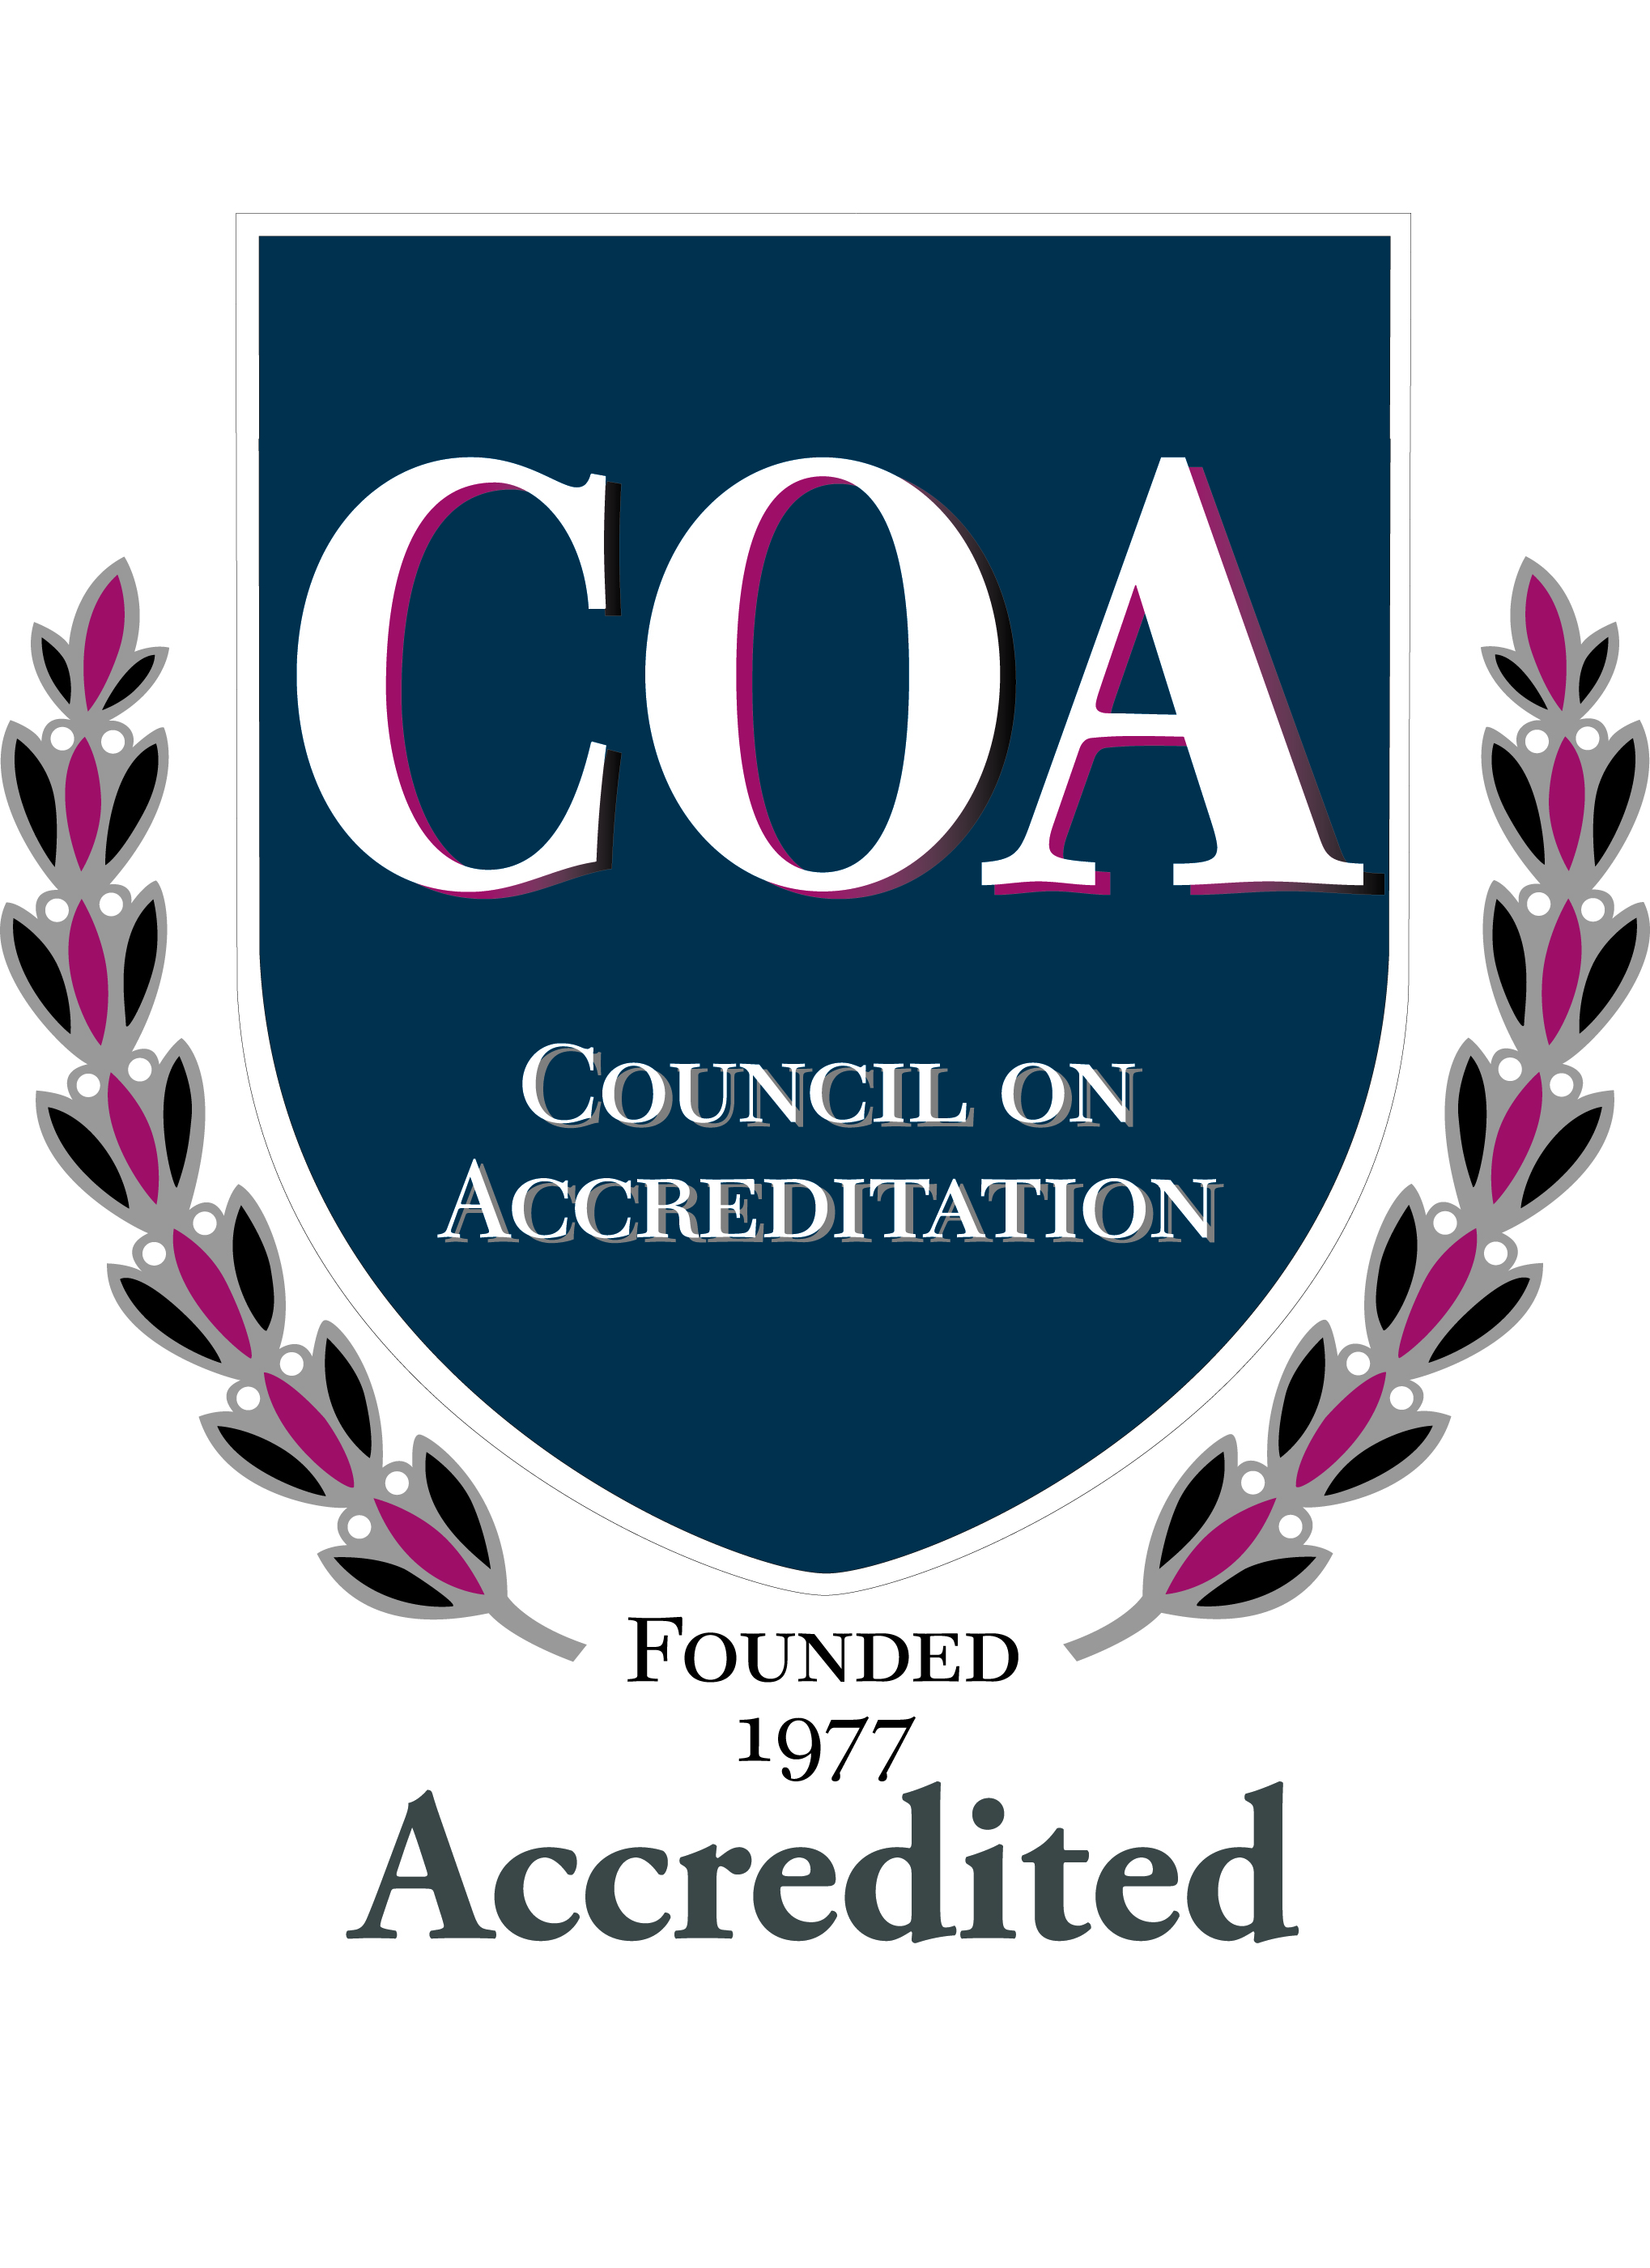 St. Ann's Center receives Accreditation from the Council on Accreditation